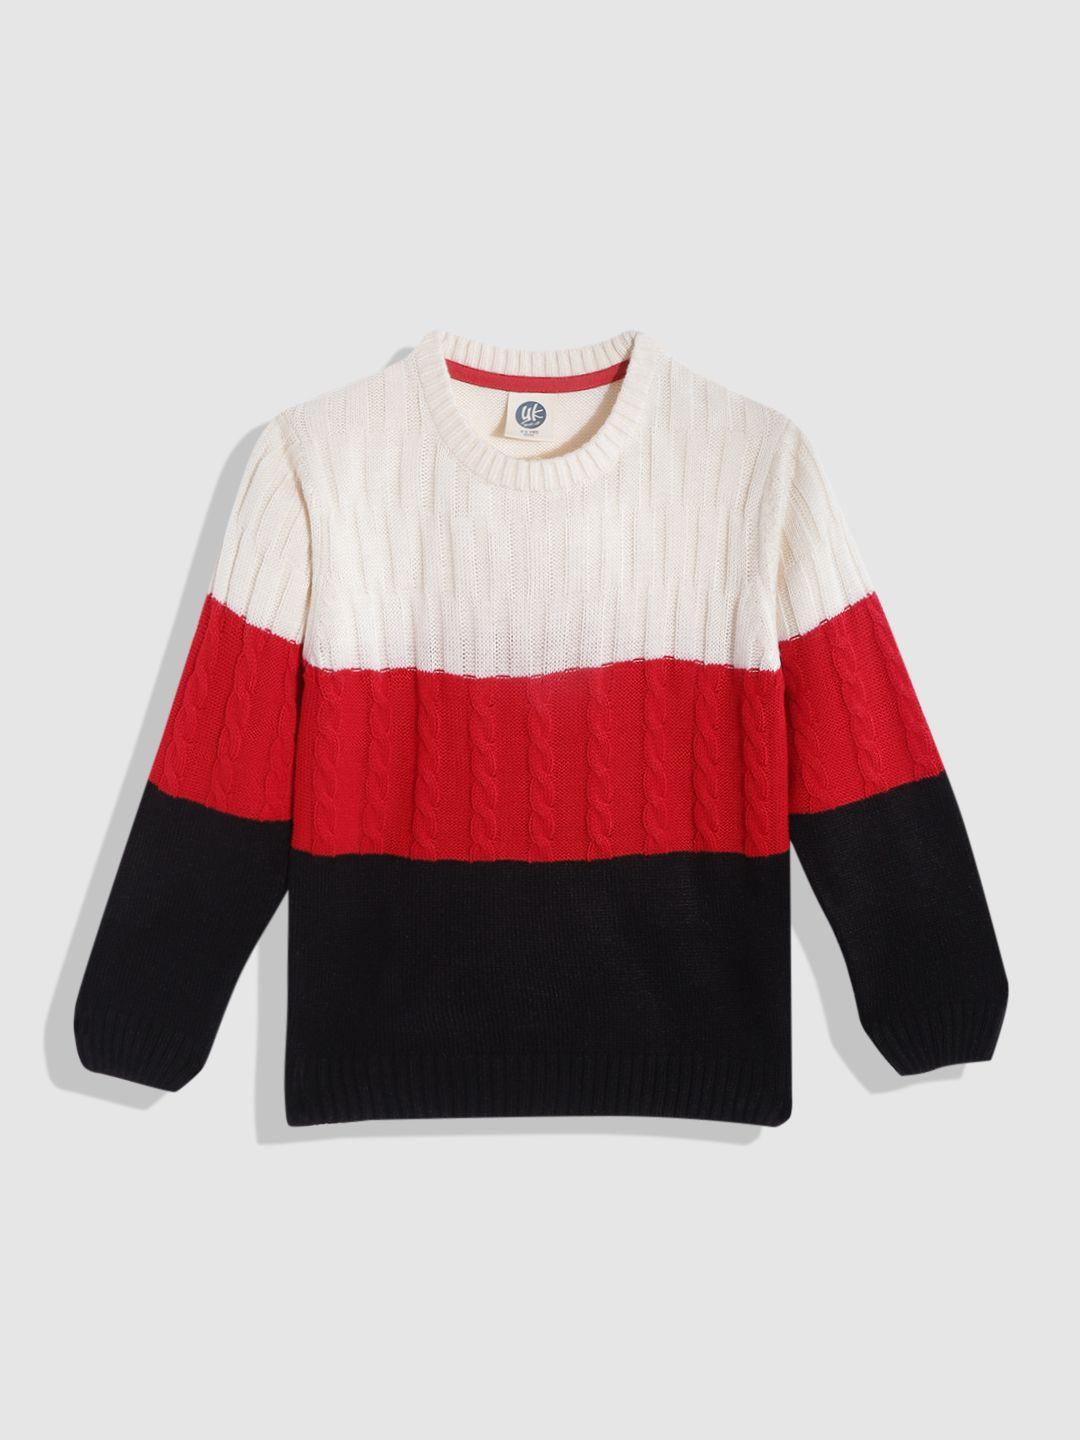 yk boys white & red cable knit colourblocked pullover